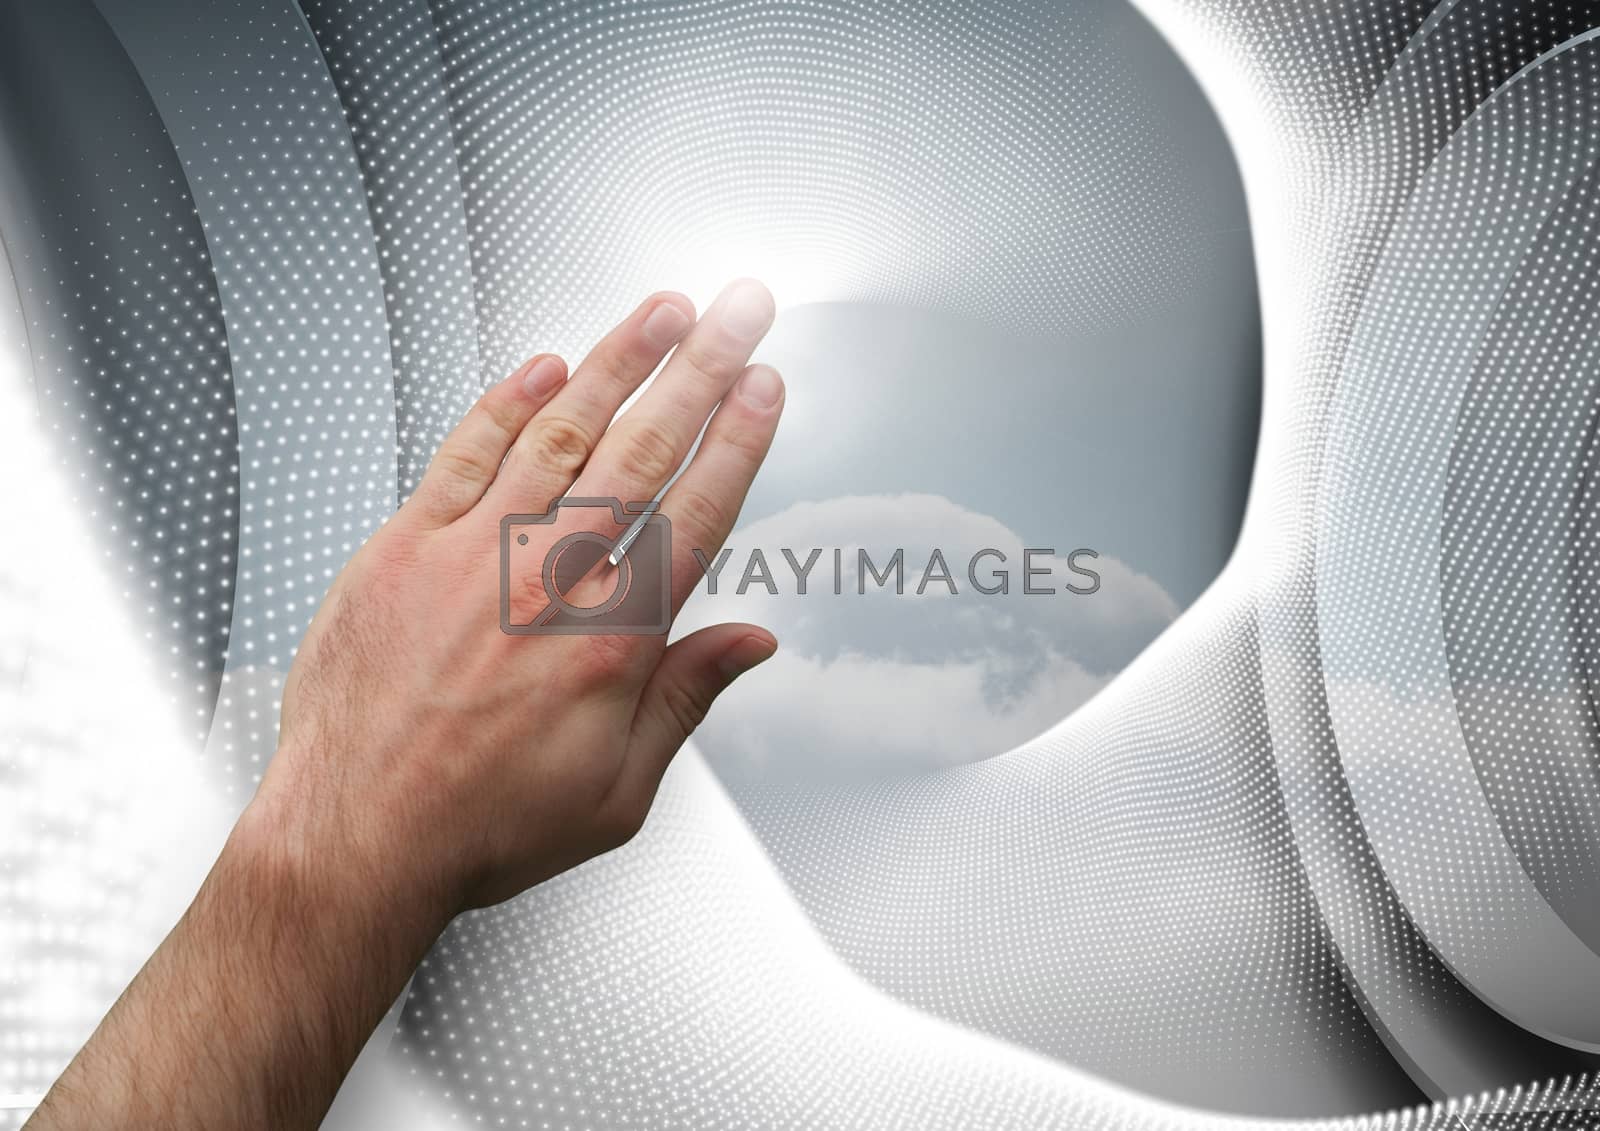 Royalty free image of Composite image of Hand touching an interaction agaisnt a grey background by Wavebreakmedia